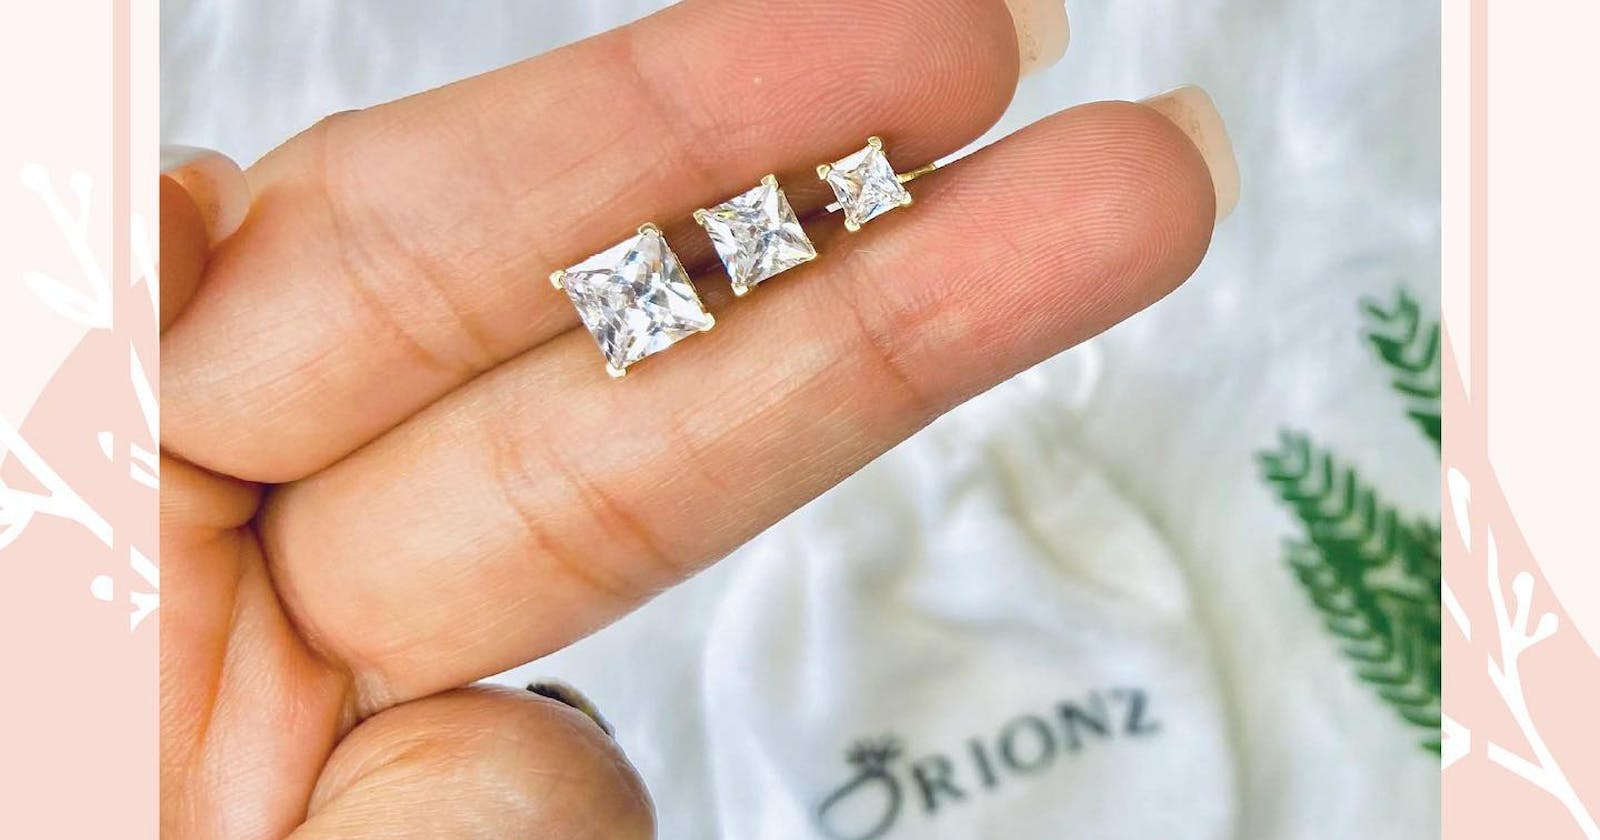 What Does Men’s Solitaire Diamond Earrings Say About You?